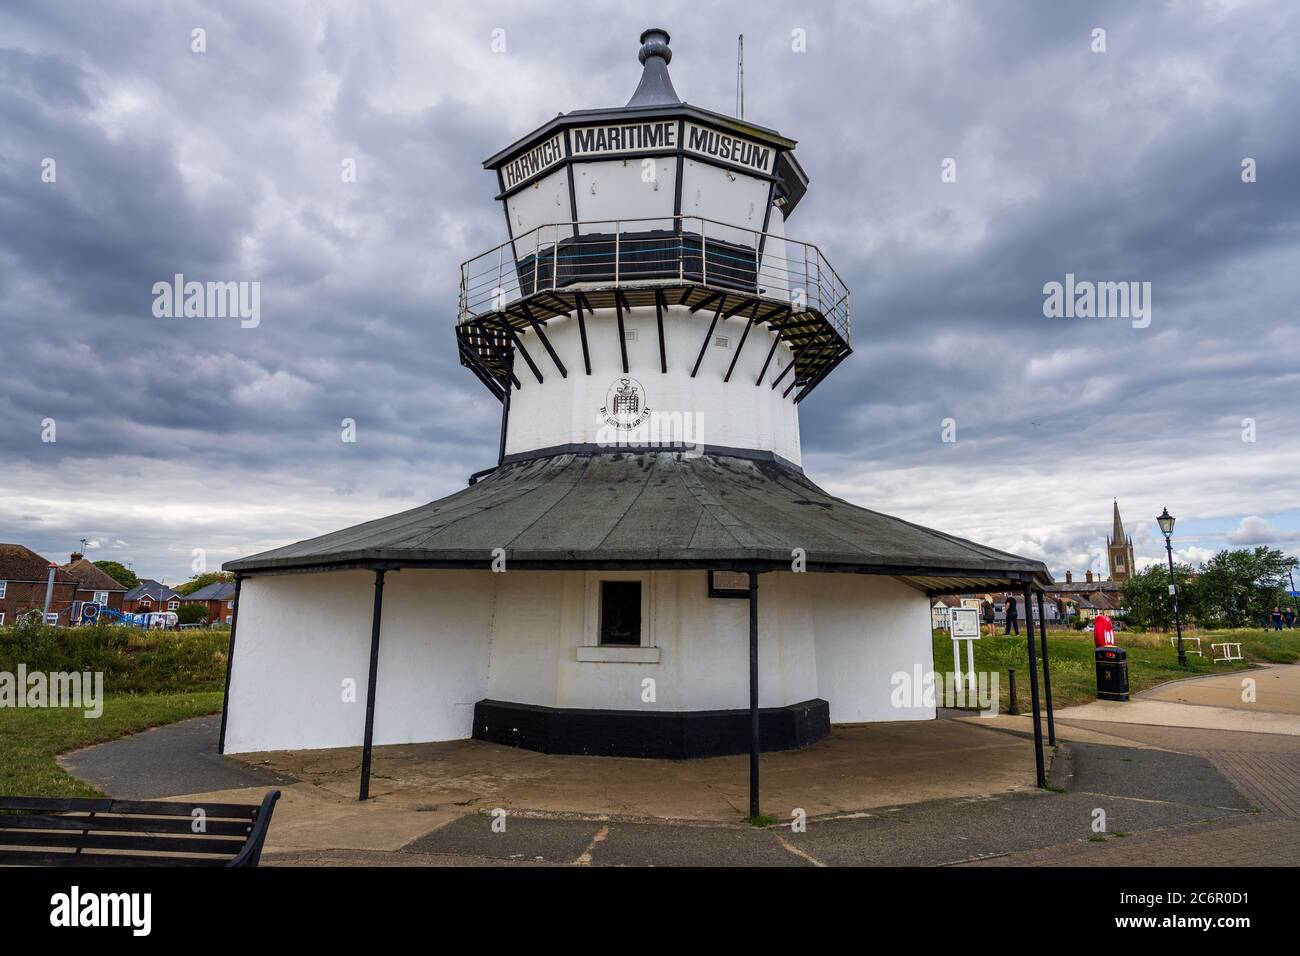 Harwich Low Lighthouse - the Low Lighthouse in Harwich, Essex UK,  was built in 1818. It now Houses the Harwich Maritime Museum. Stock Photo